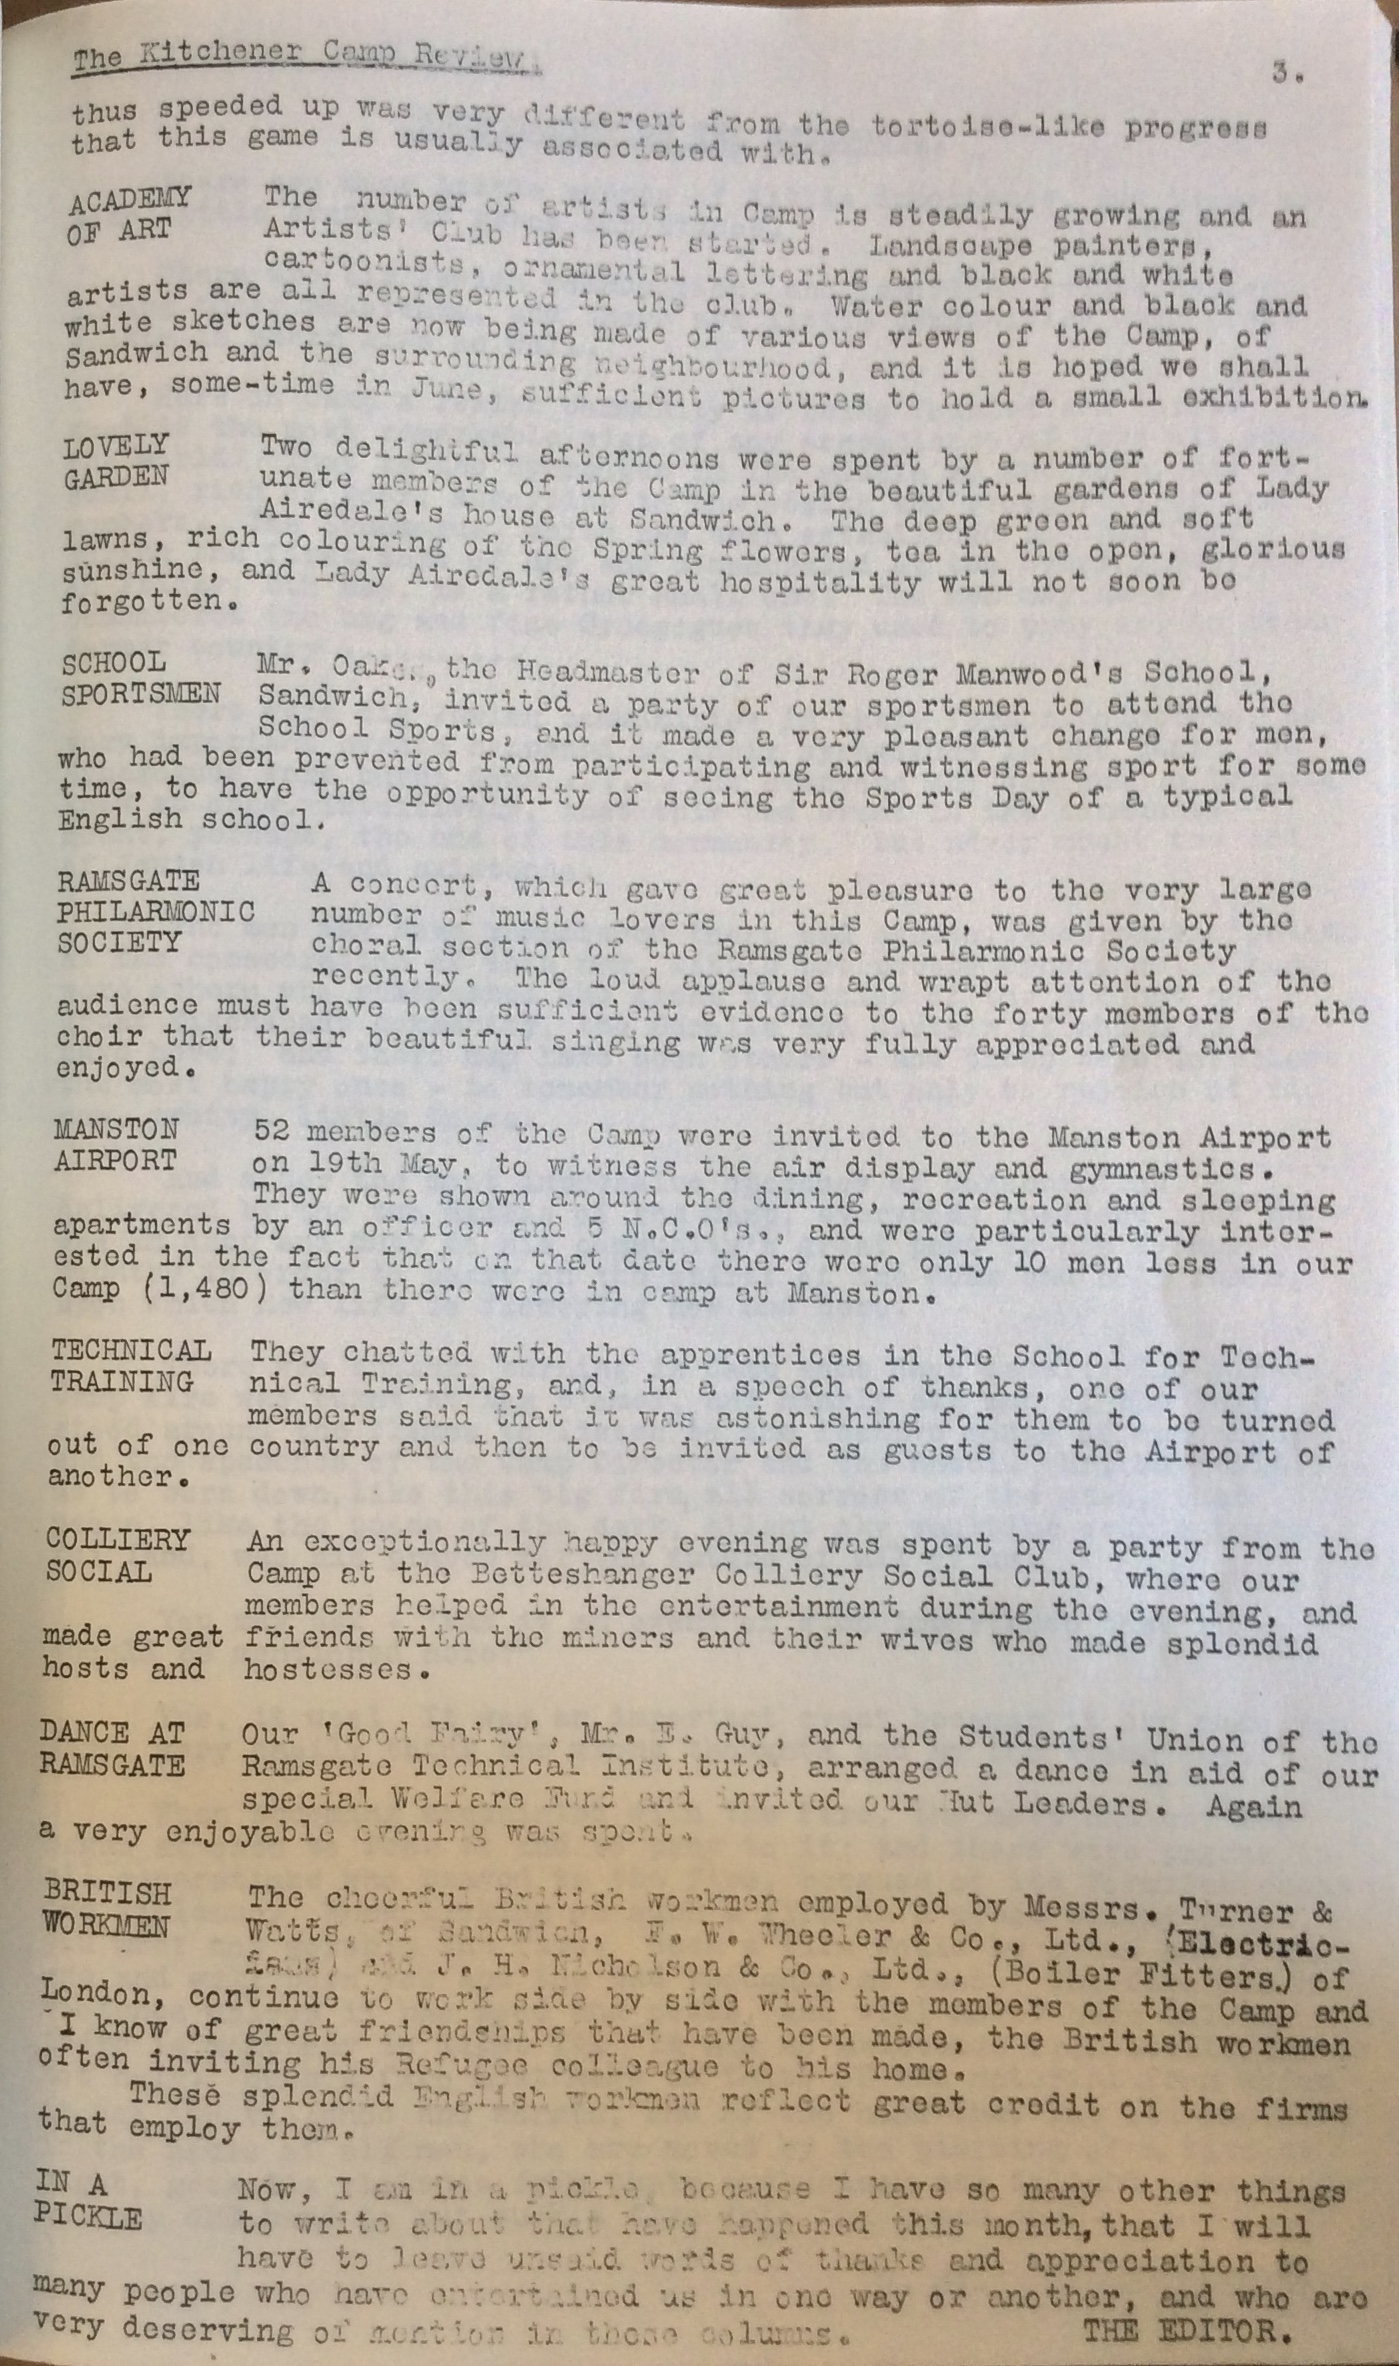 Kitchener Camp Review, June 1939, page 3